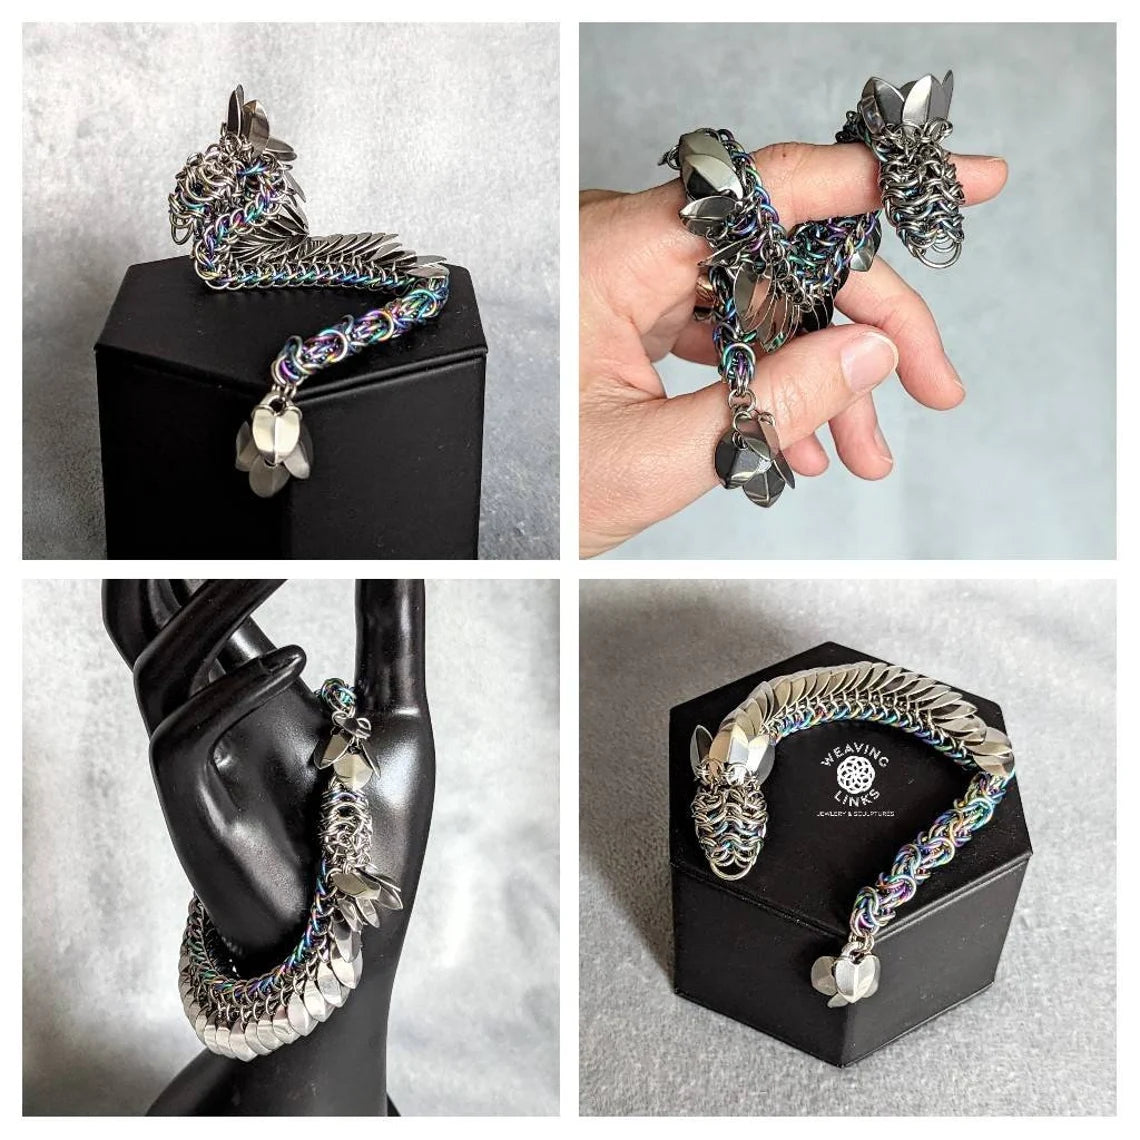 Small Dragon Bracelet and Sculpture